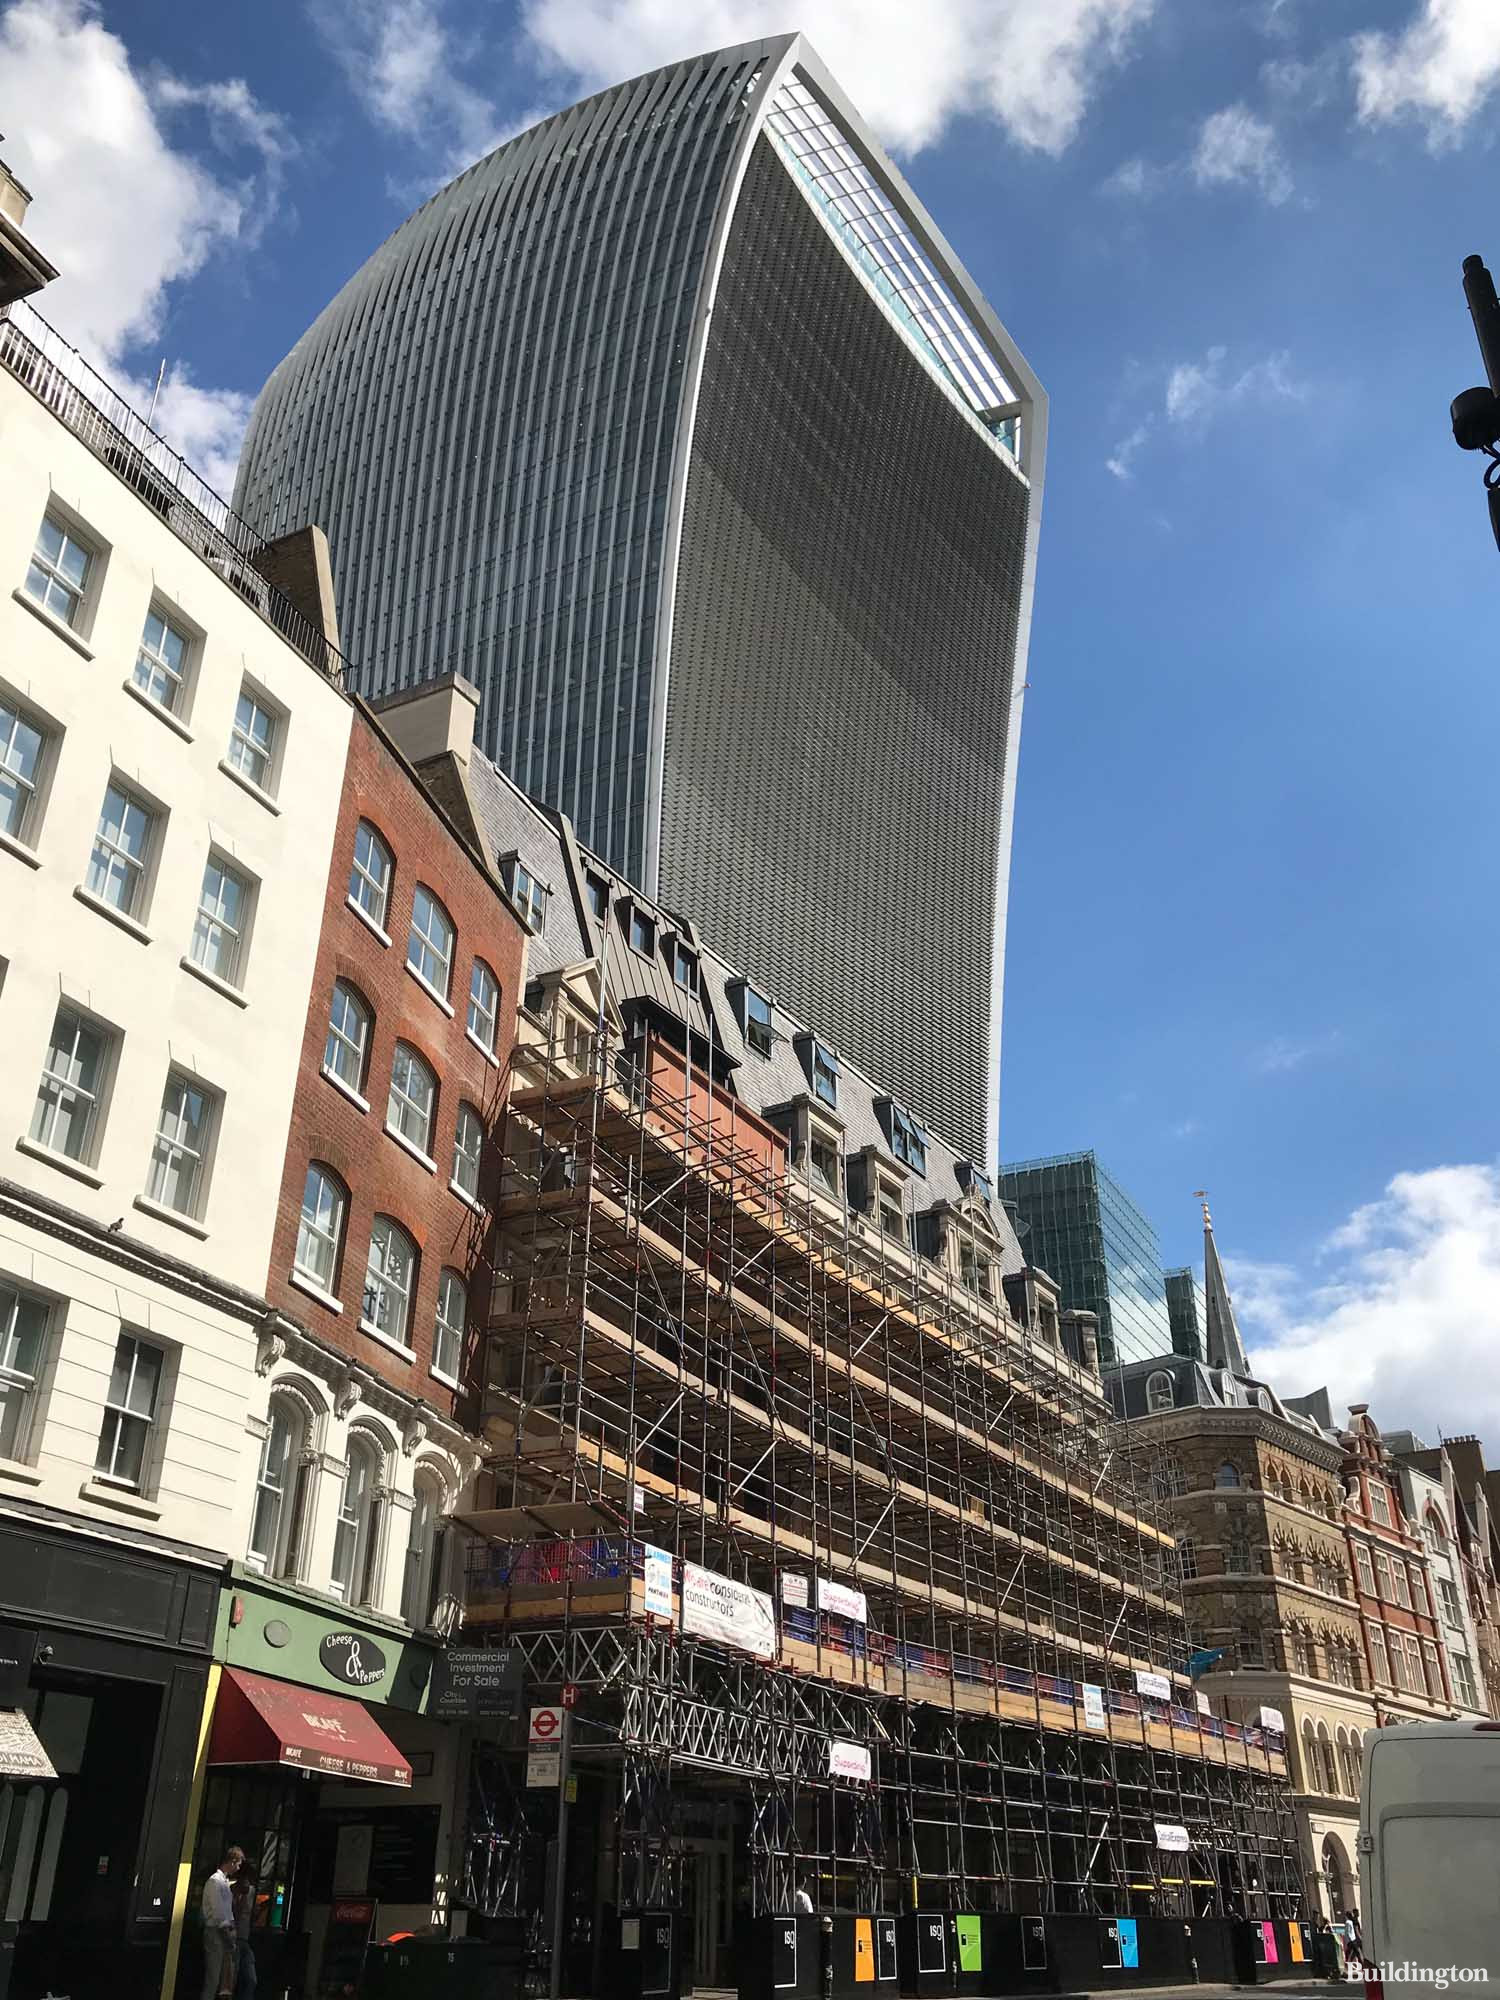 ISG refurbishing 11 Philpot Lane office building on Eastcheap in the City of London EC3. 20 Fenchurch Street in the background.